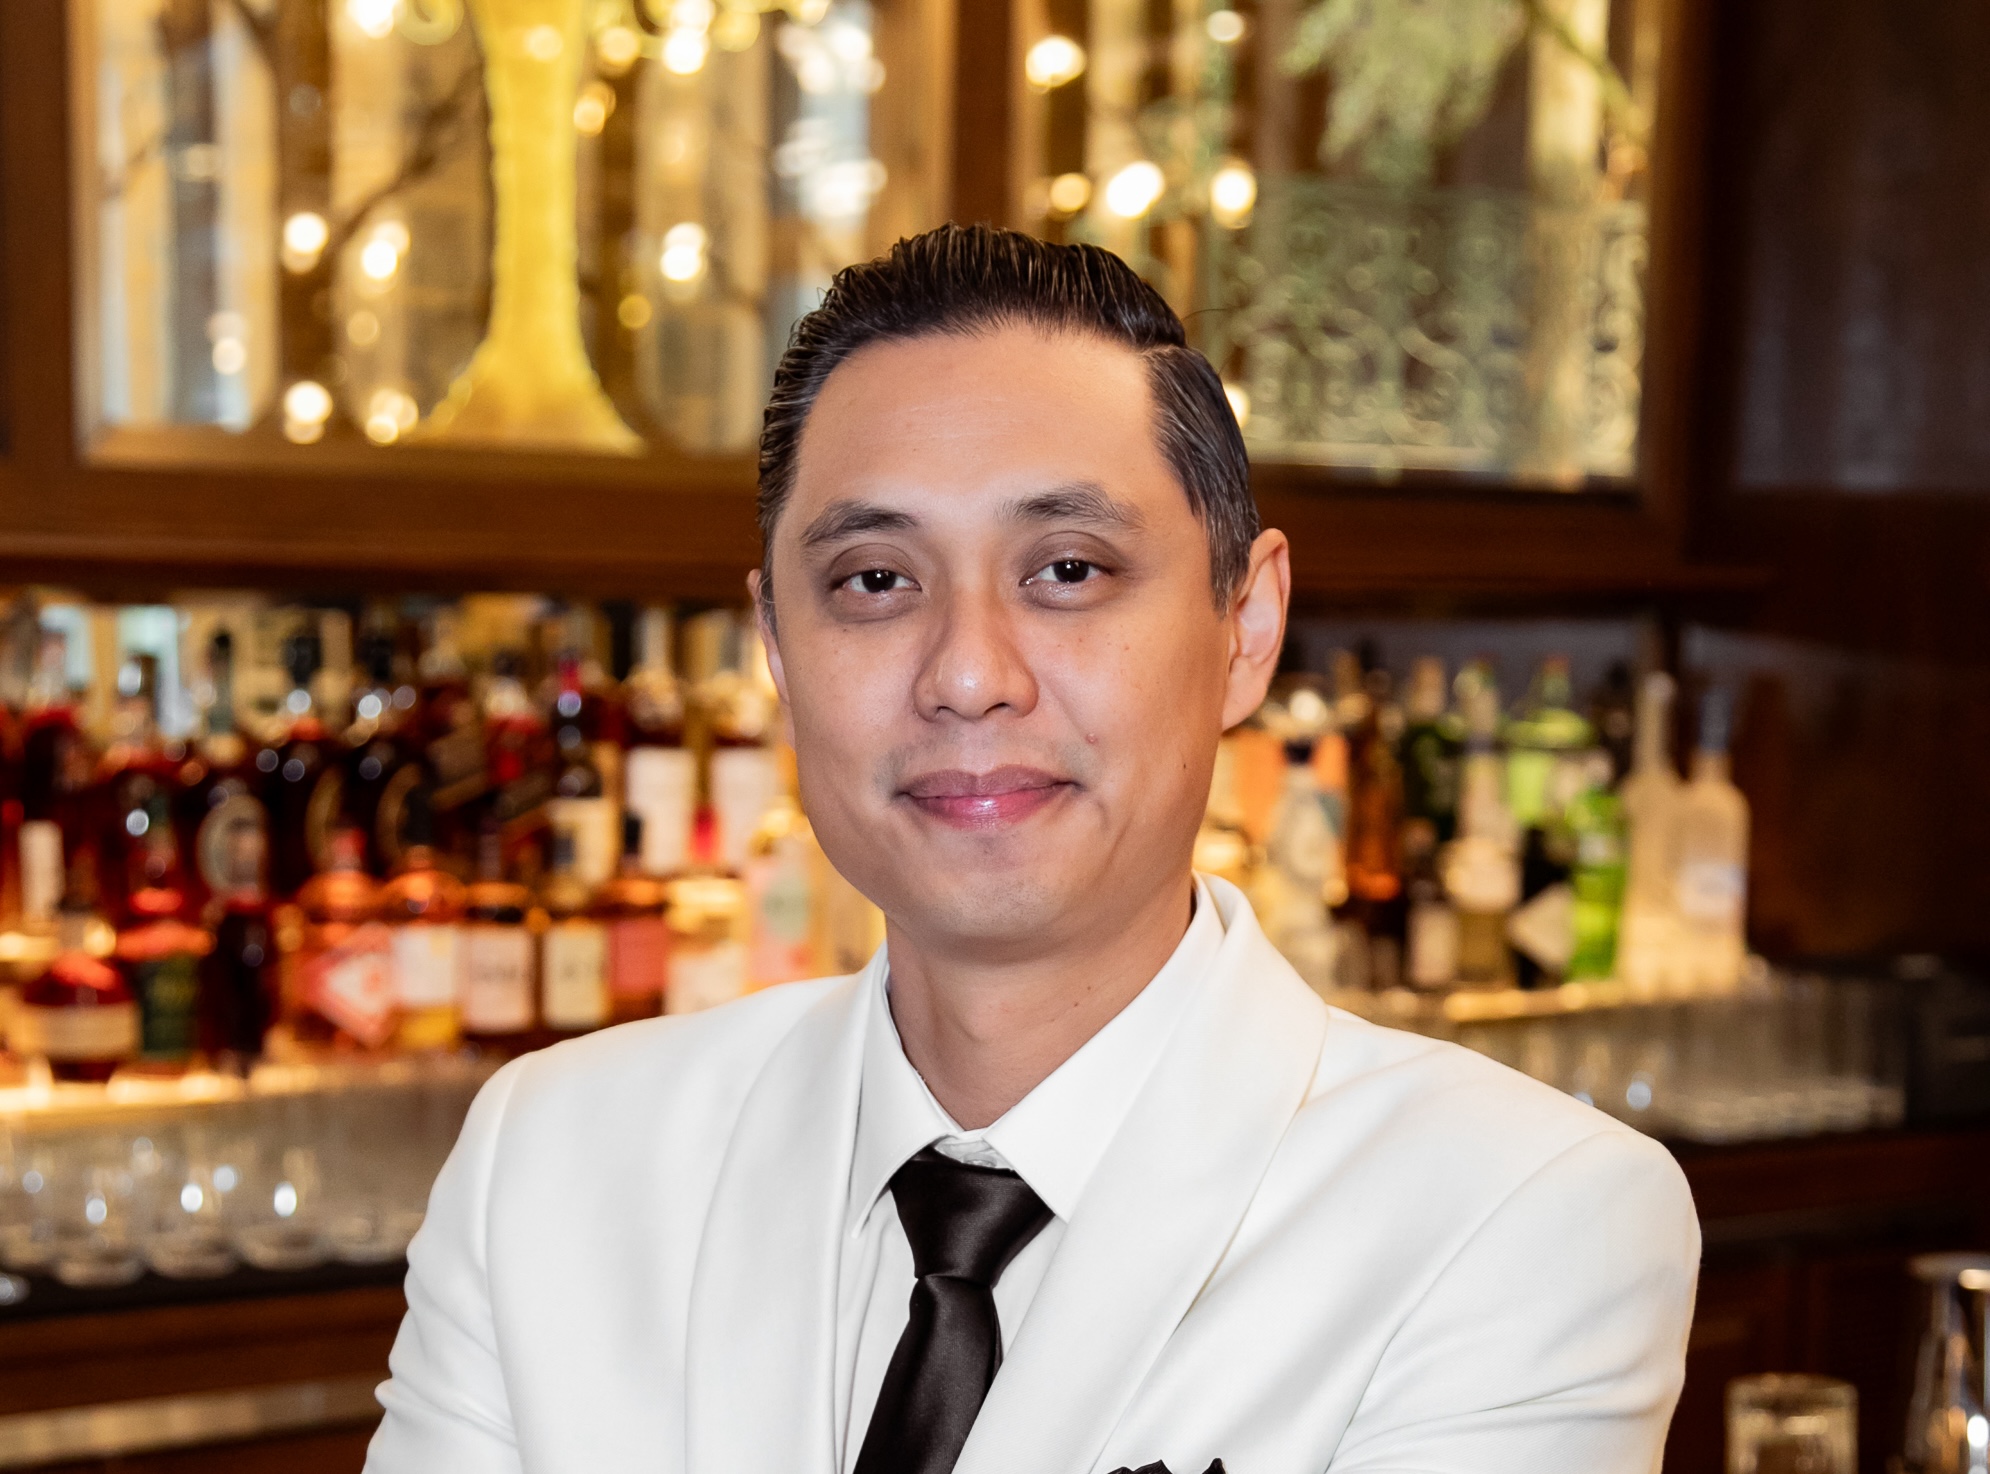 A man in a white suit stands beside the bar counter.